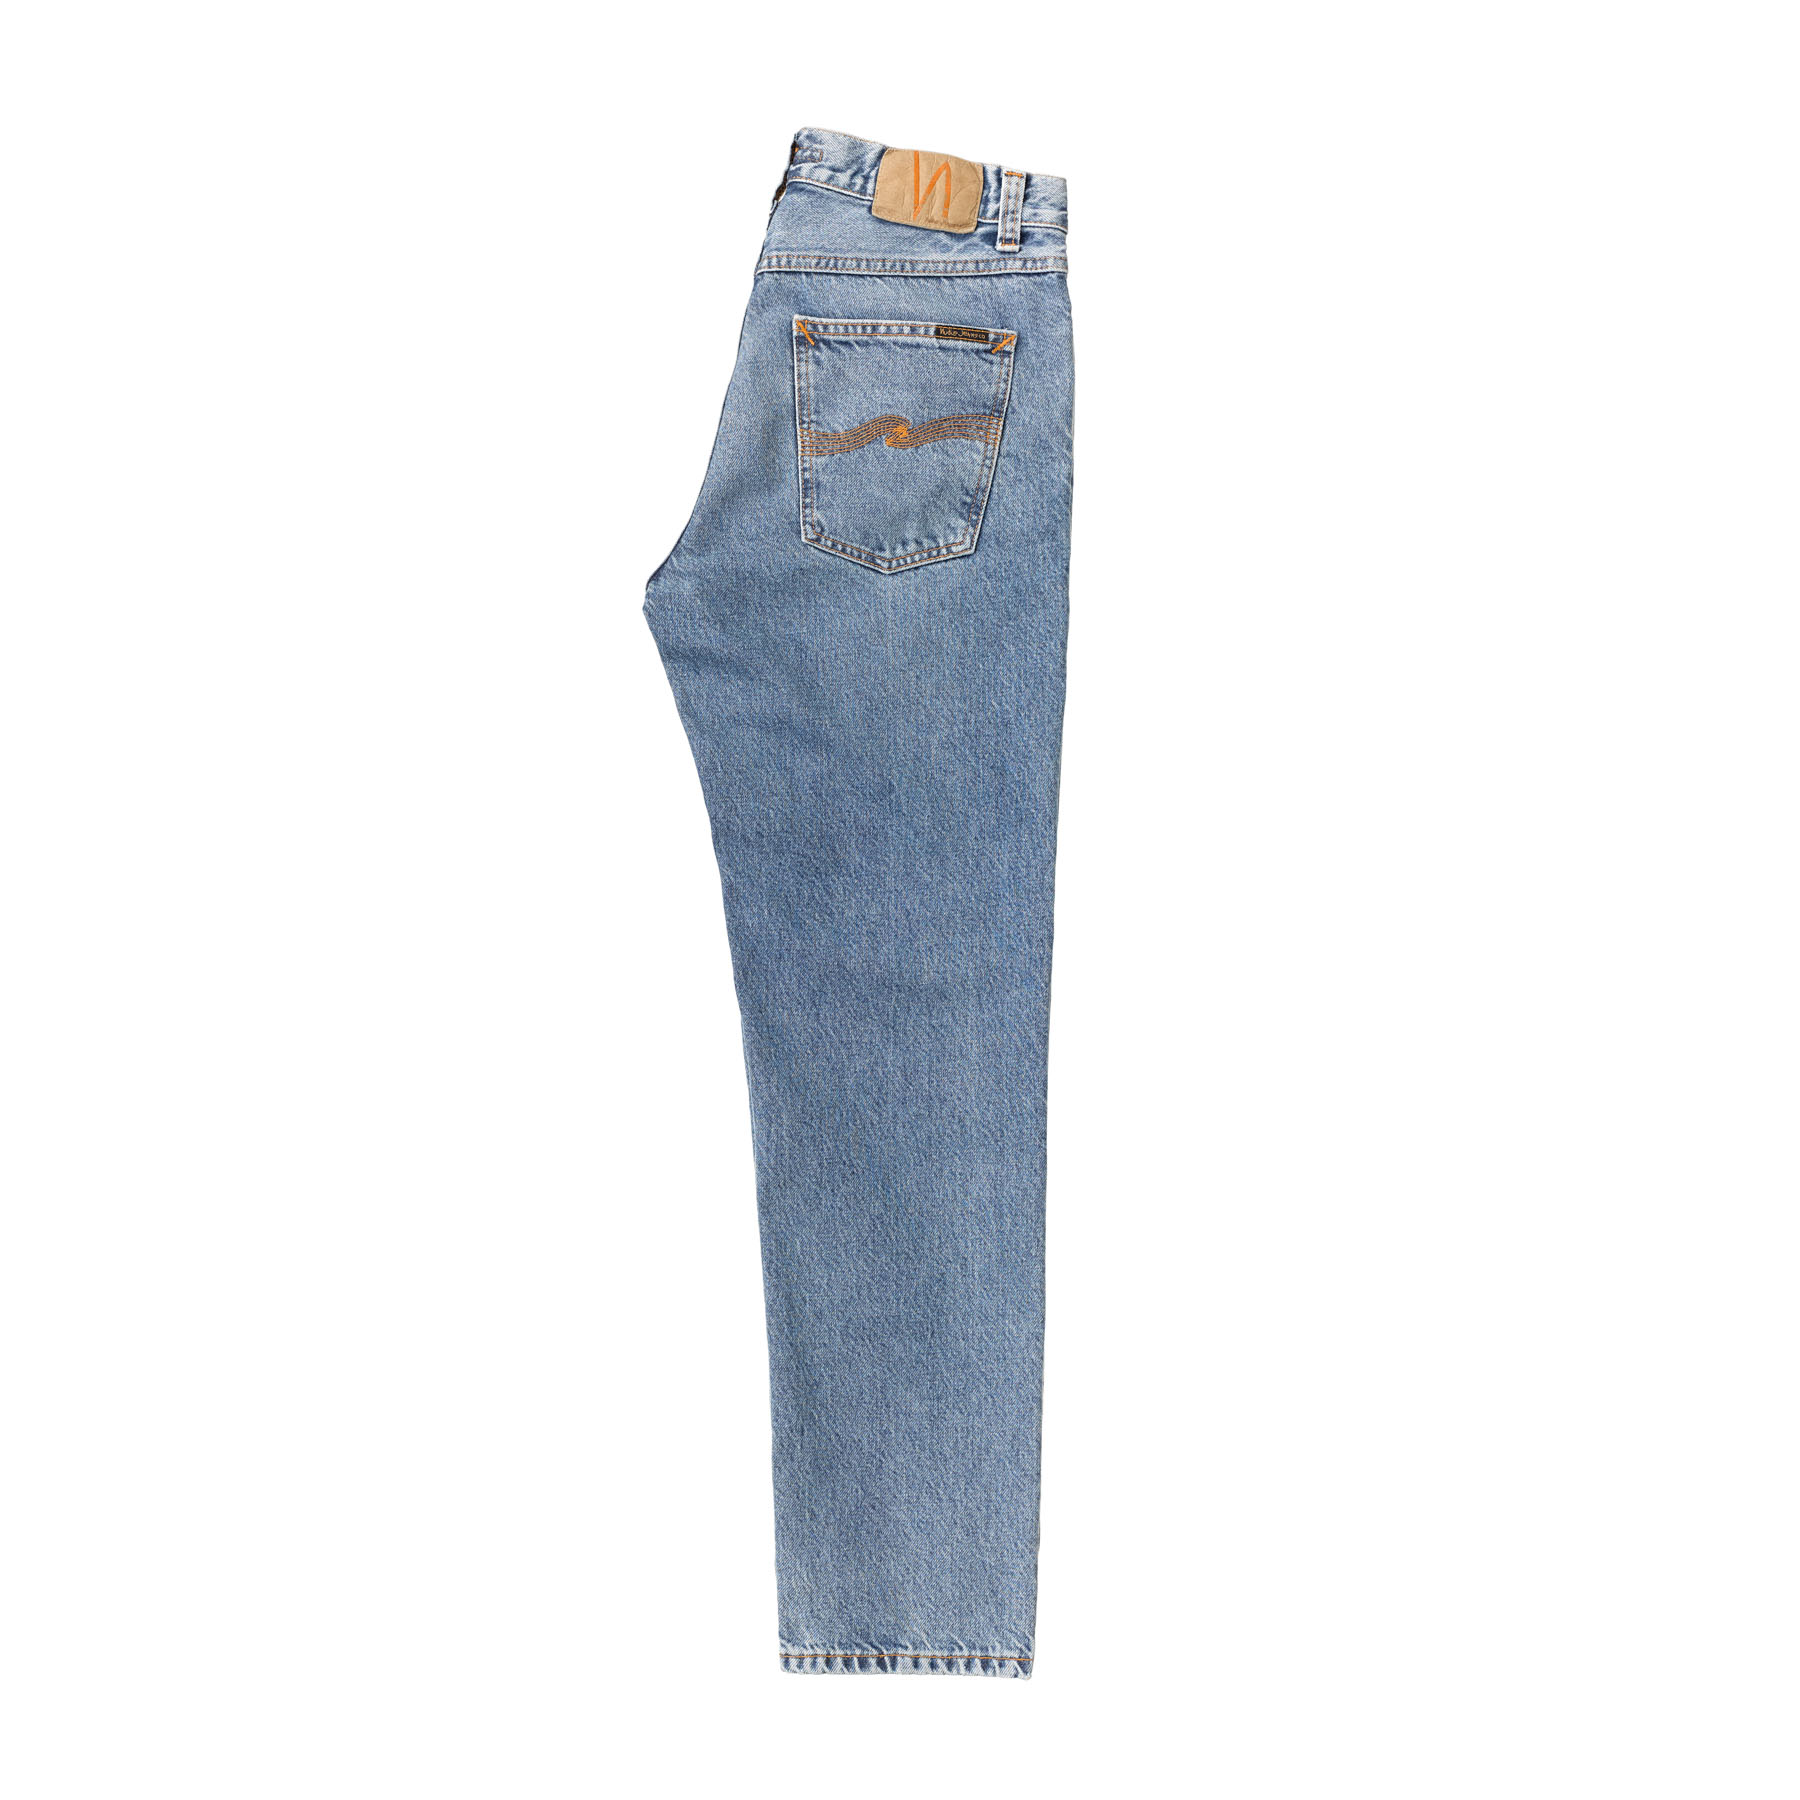 NUDIE JEANS Jeans Gritty Jackson blue traces 34/32